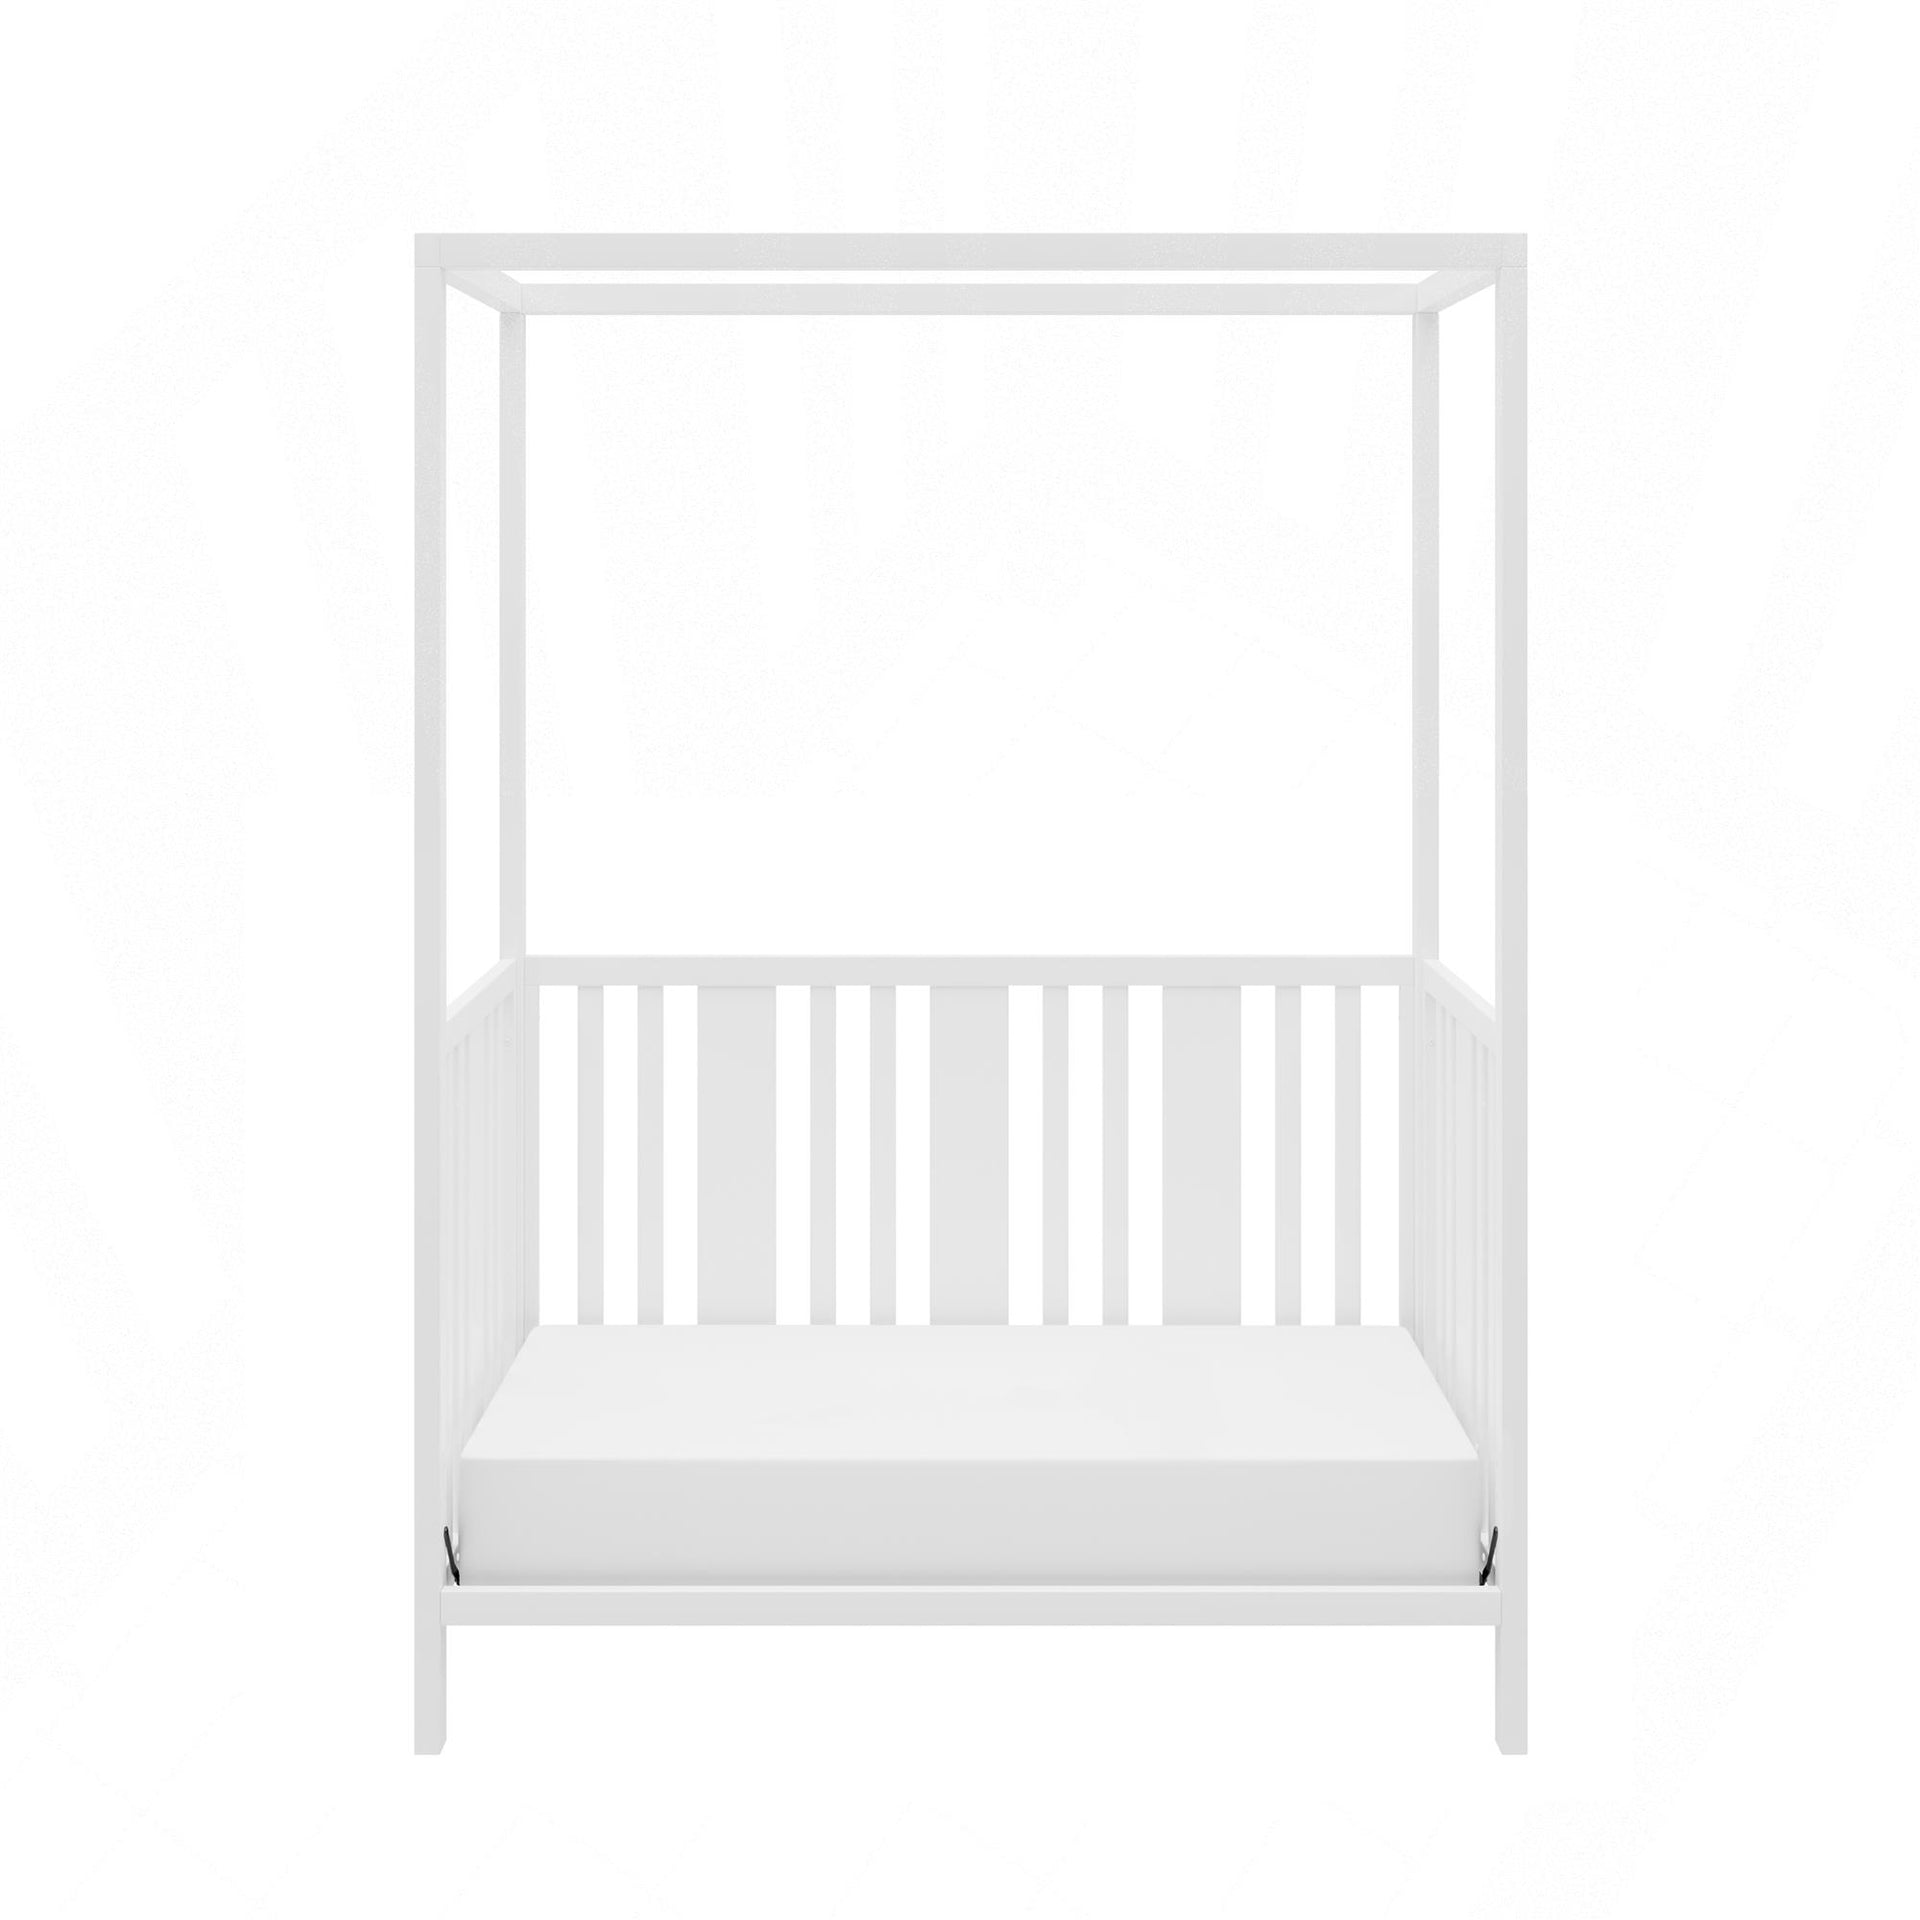 Little Seeds Crawford 3-in-1 Canopy Crib - White